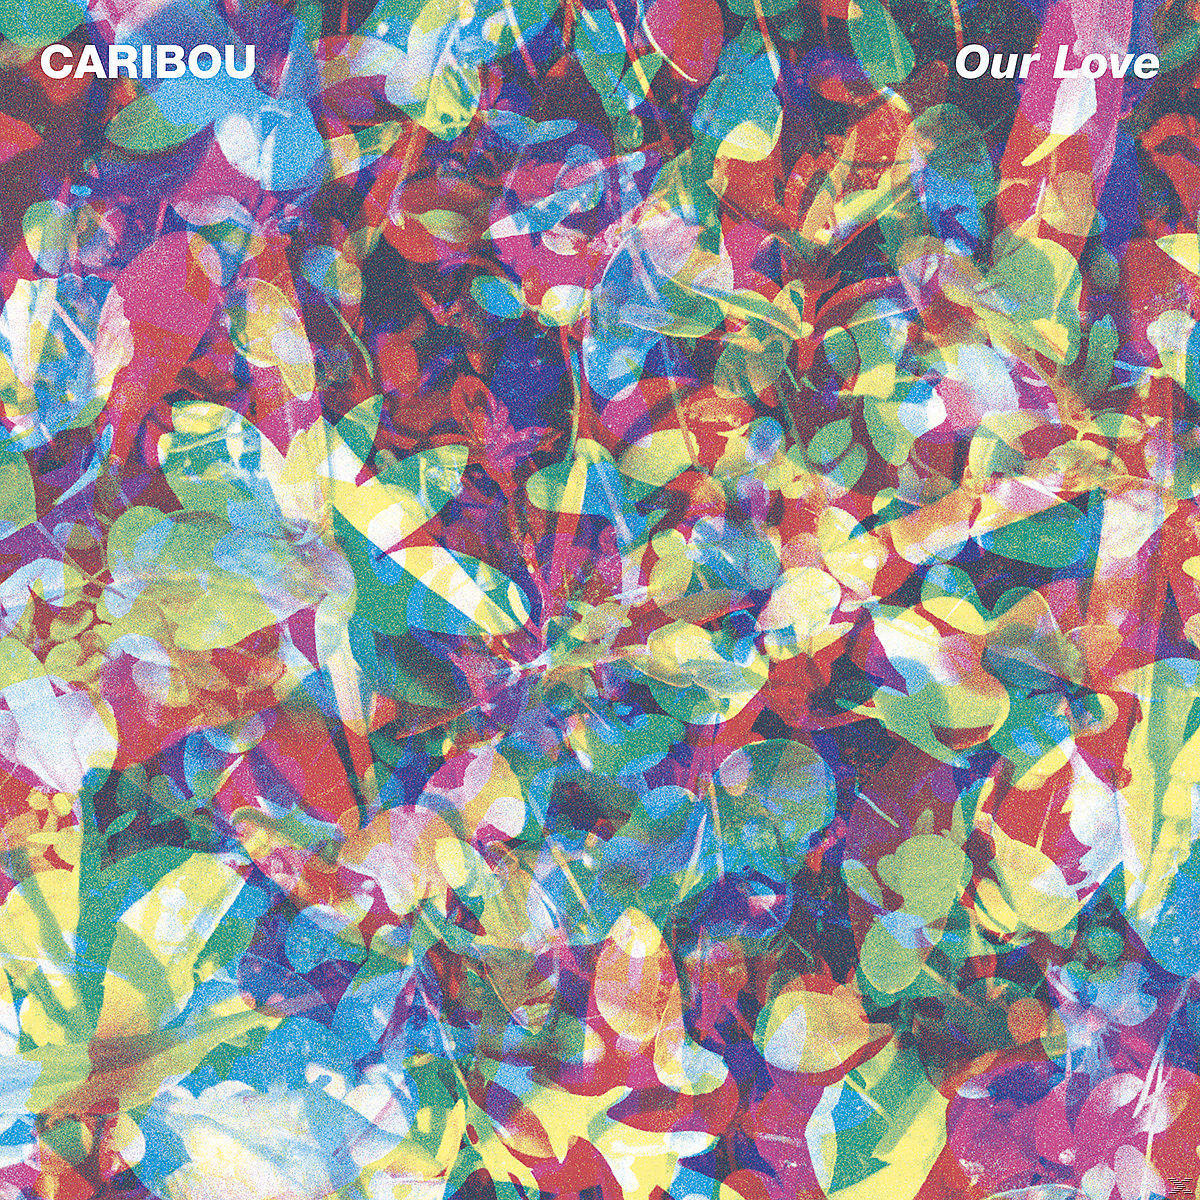 Our Love - (CD) - Caribou